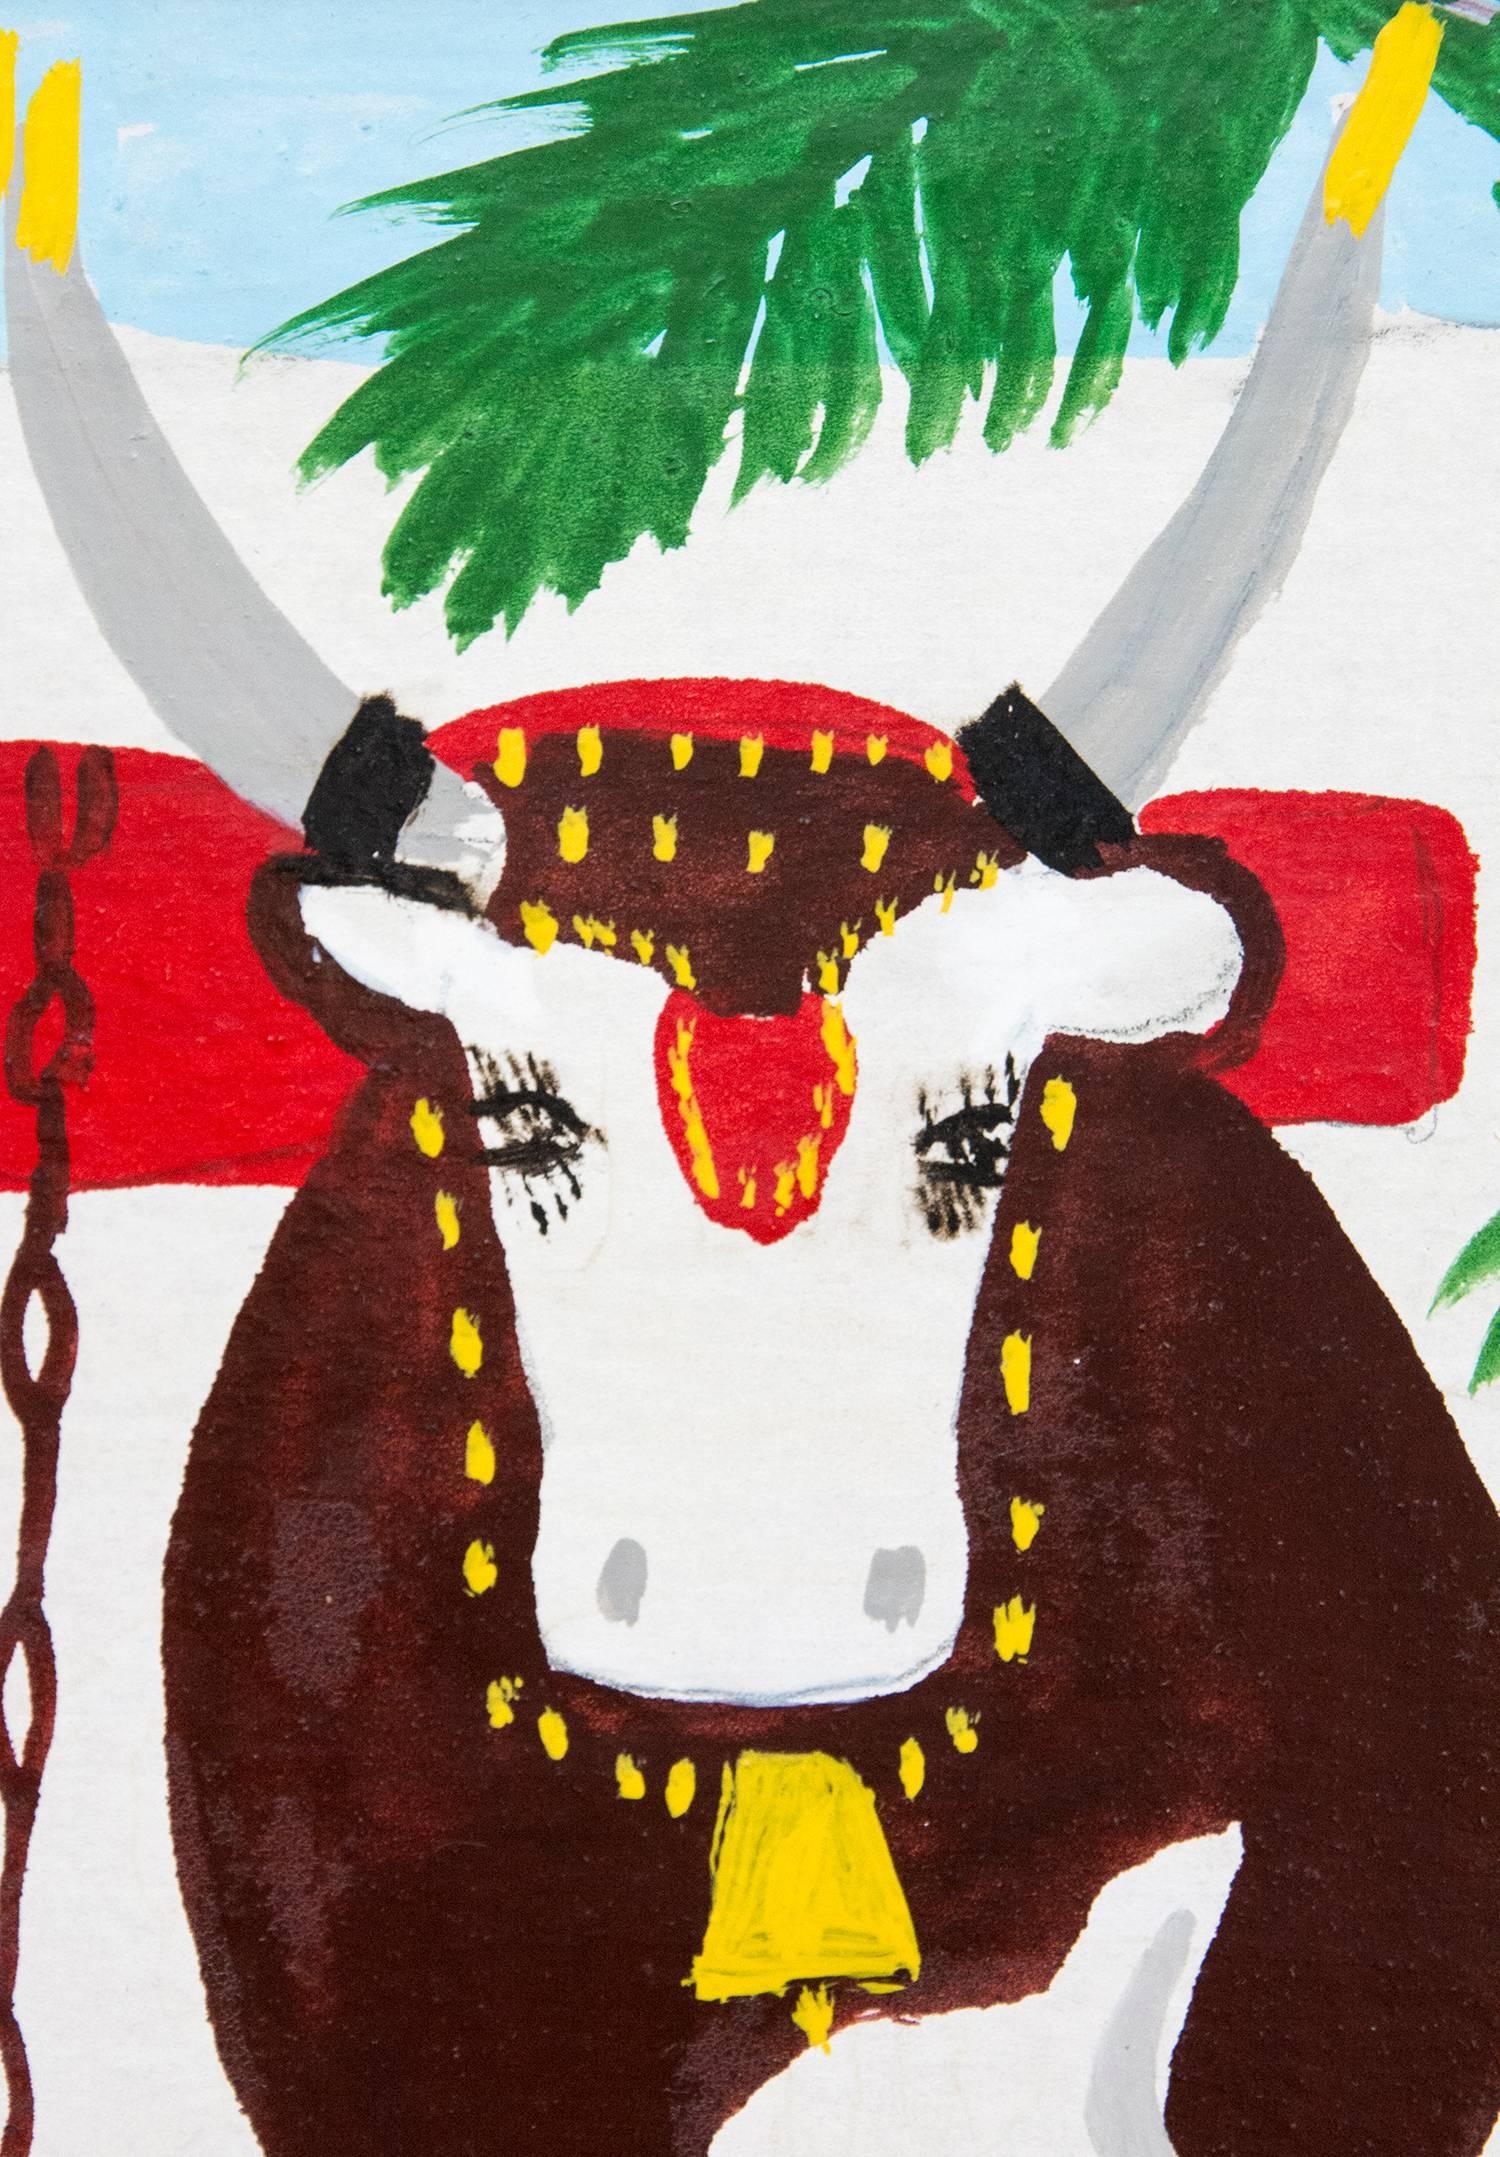 Pair of Oxen With Tree in Foreground - Folk Art Painting by Maud Lewis